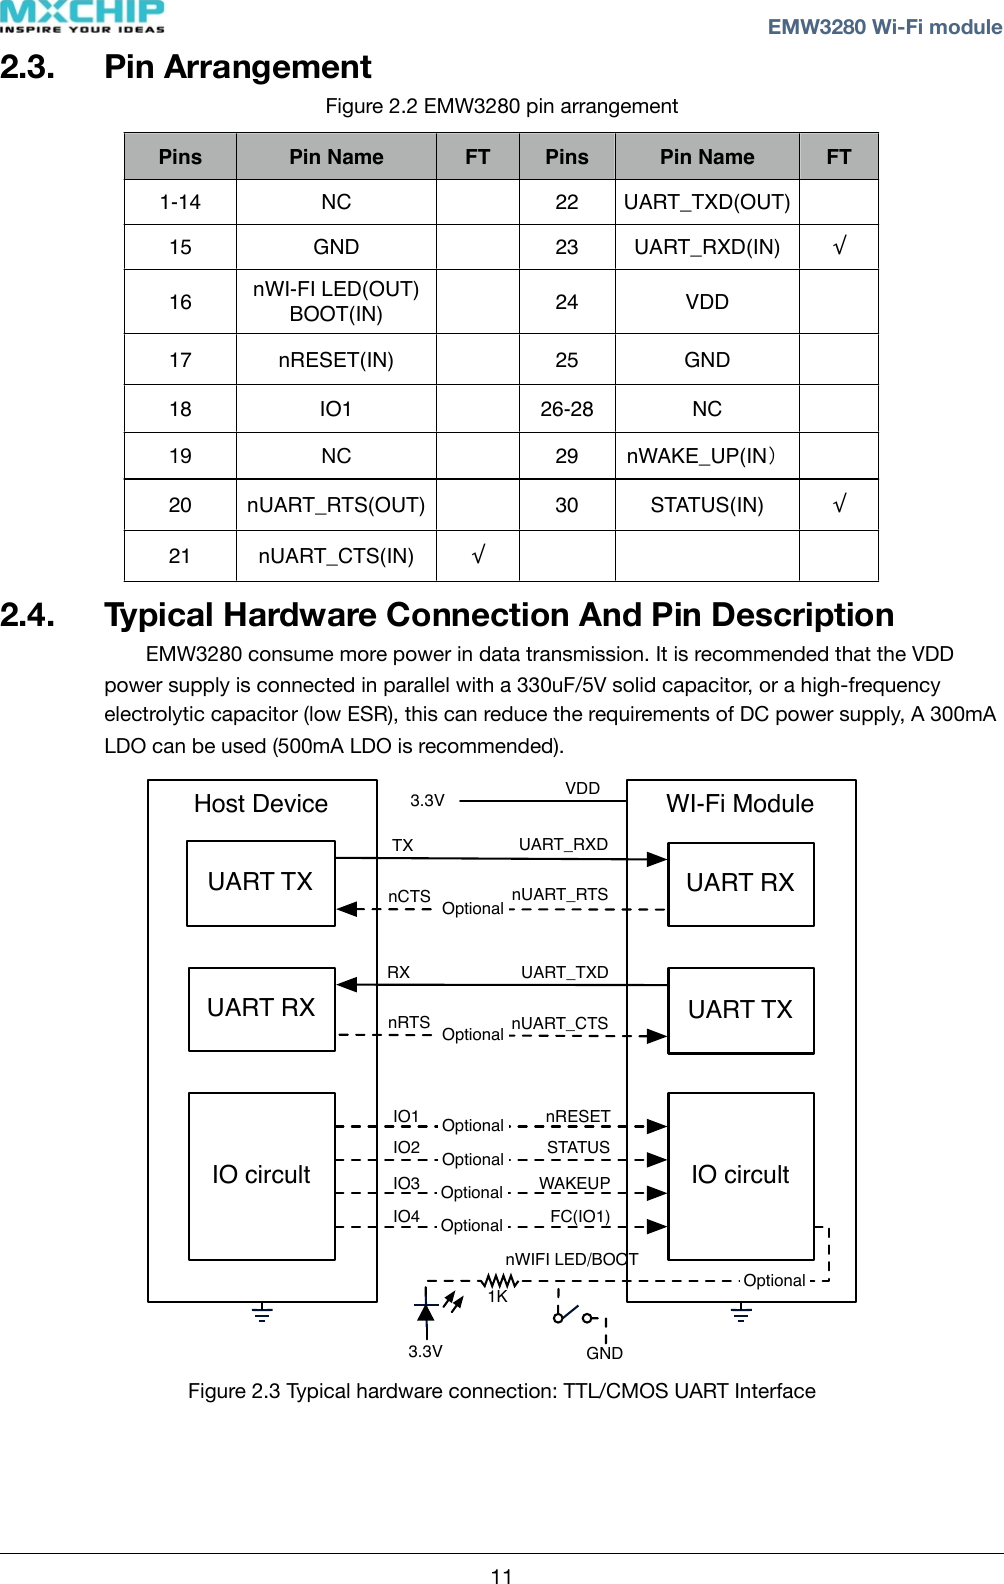 2.3. Pin Arrangement Figure 2.2 EMW3280 pin arrangementPinsPin NameFTPinsPin NameFT1-14NC22UART_TXD(OUT)15GND23UART_RXD(IN)√16nWI-FI LED(OUT)BOOT(IN)24VDD17nRESET(IN)25GND18IO126-28NC19NC29nWAKE_UP(IN）20nUART_RTS(OUT)30STATUS(IN)√21nUART_CTS(IN)√2.4. Typical Hardware Connection And Pin Description EMW3280 consume more power in data transmission. It is recommended that the VDD power supply is connected in parallel with a 330uF/5V solid capacitor, or a high-frequency electrolytic capacitor (low ESR), this can reduce the requirements of DC power supply, A 300mA LDO can be used (500mA LDO is recommended).Host DeviceUART TXUART RXIO circultWI-Fi ModuleUART TXIO circultUART RXTXnCTSUART_RXDnUART_RTSRXnRTSUART_TXDnUART_CTSIO2IO1IO3STATUSnRESETWAKEUPOptionalOptionalOptionalOptionalOptional3.3VOptionalnWIFI LED/BOOT3.3V VDDGND1KIO4 FC(IO1)Optional Figure 2.3 Typical hardware connection: TTL/CMOS UART Interface ! ! EMW3280 Wi-Fi module11